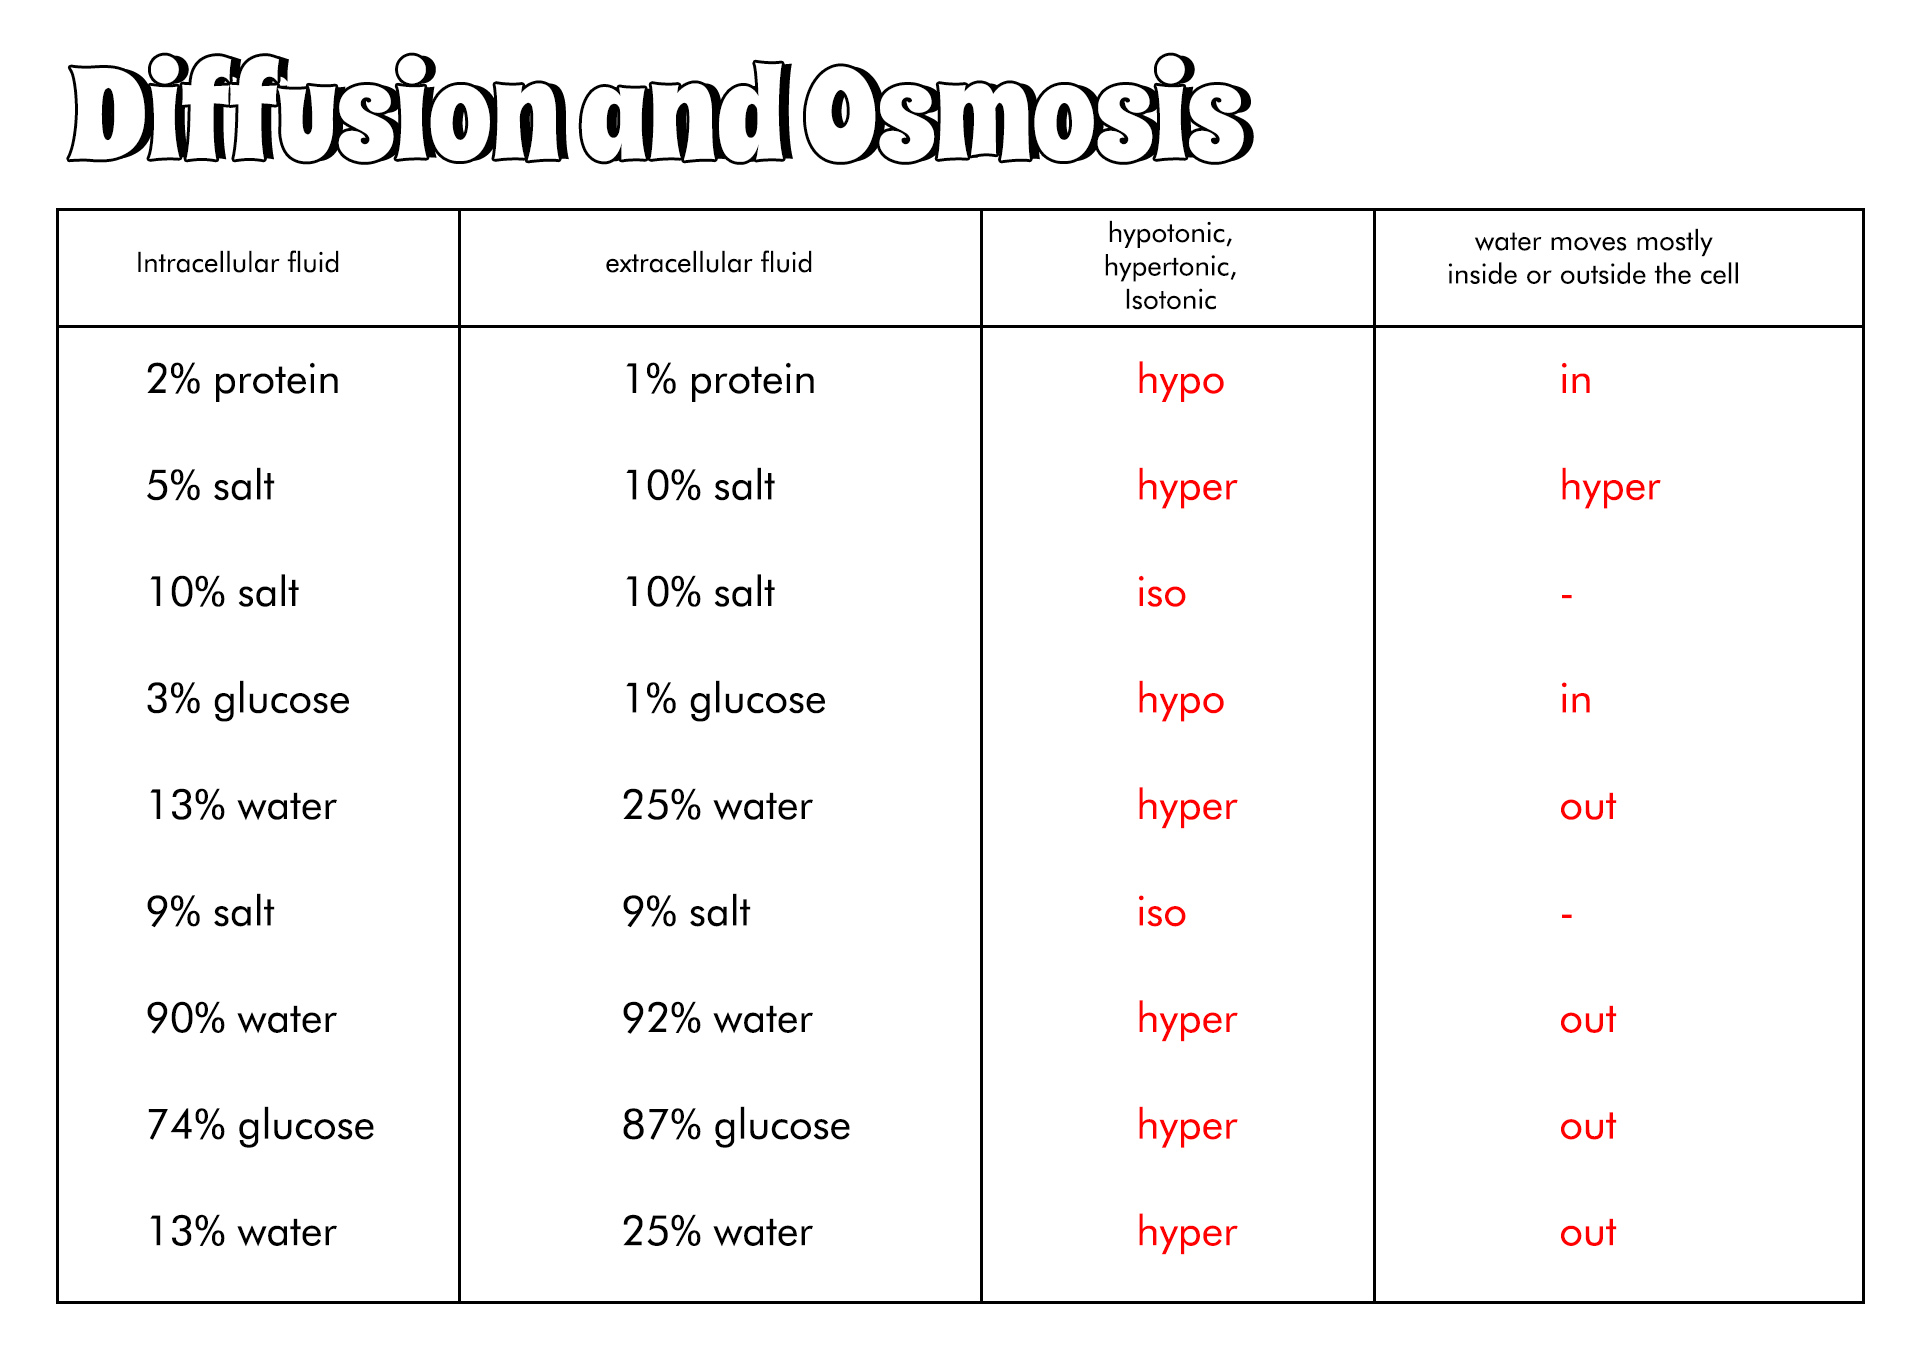 Diffusion and Osmosis Practice Answer Key Image